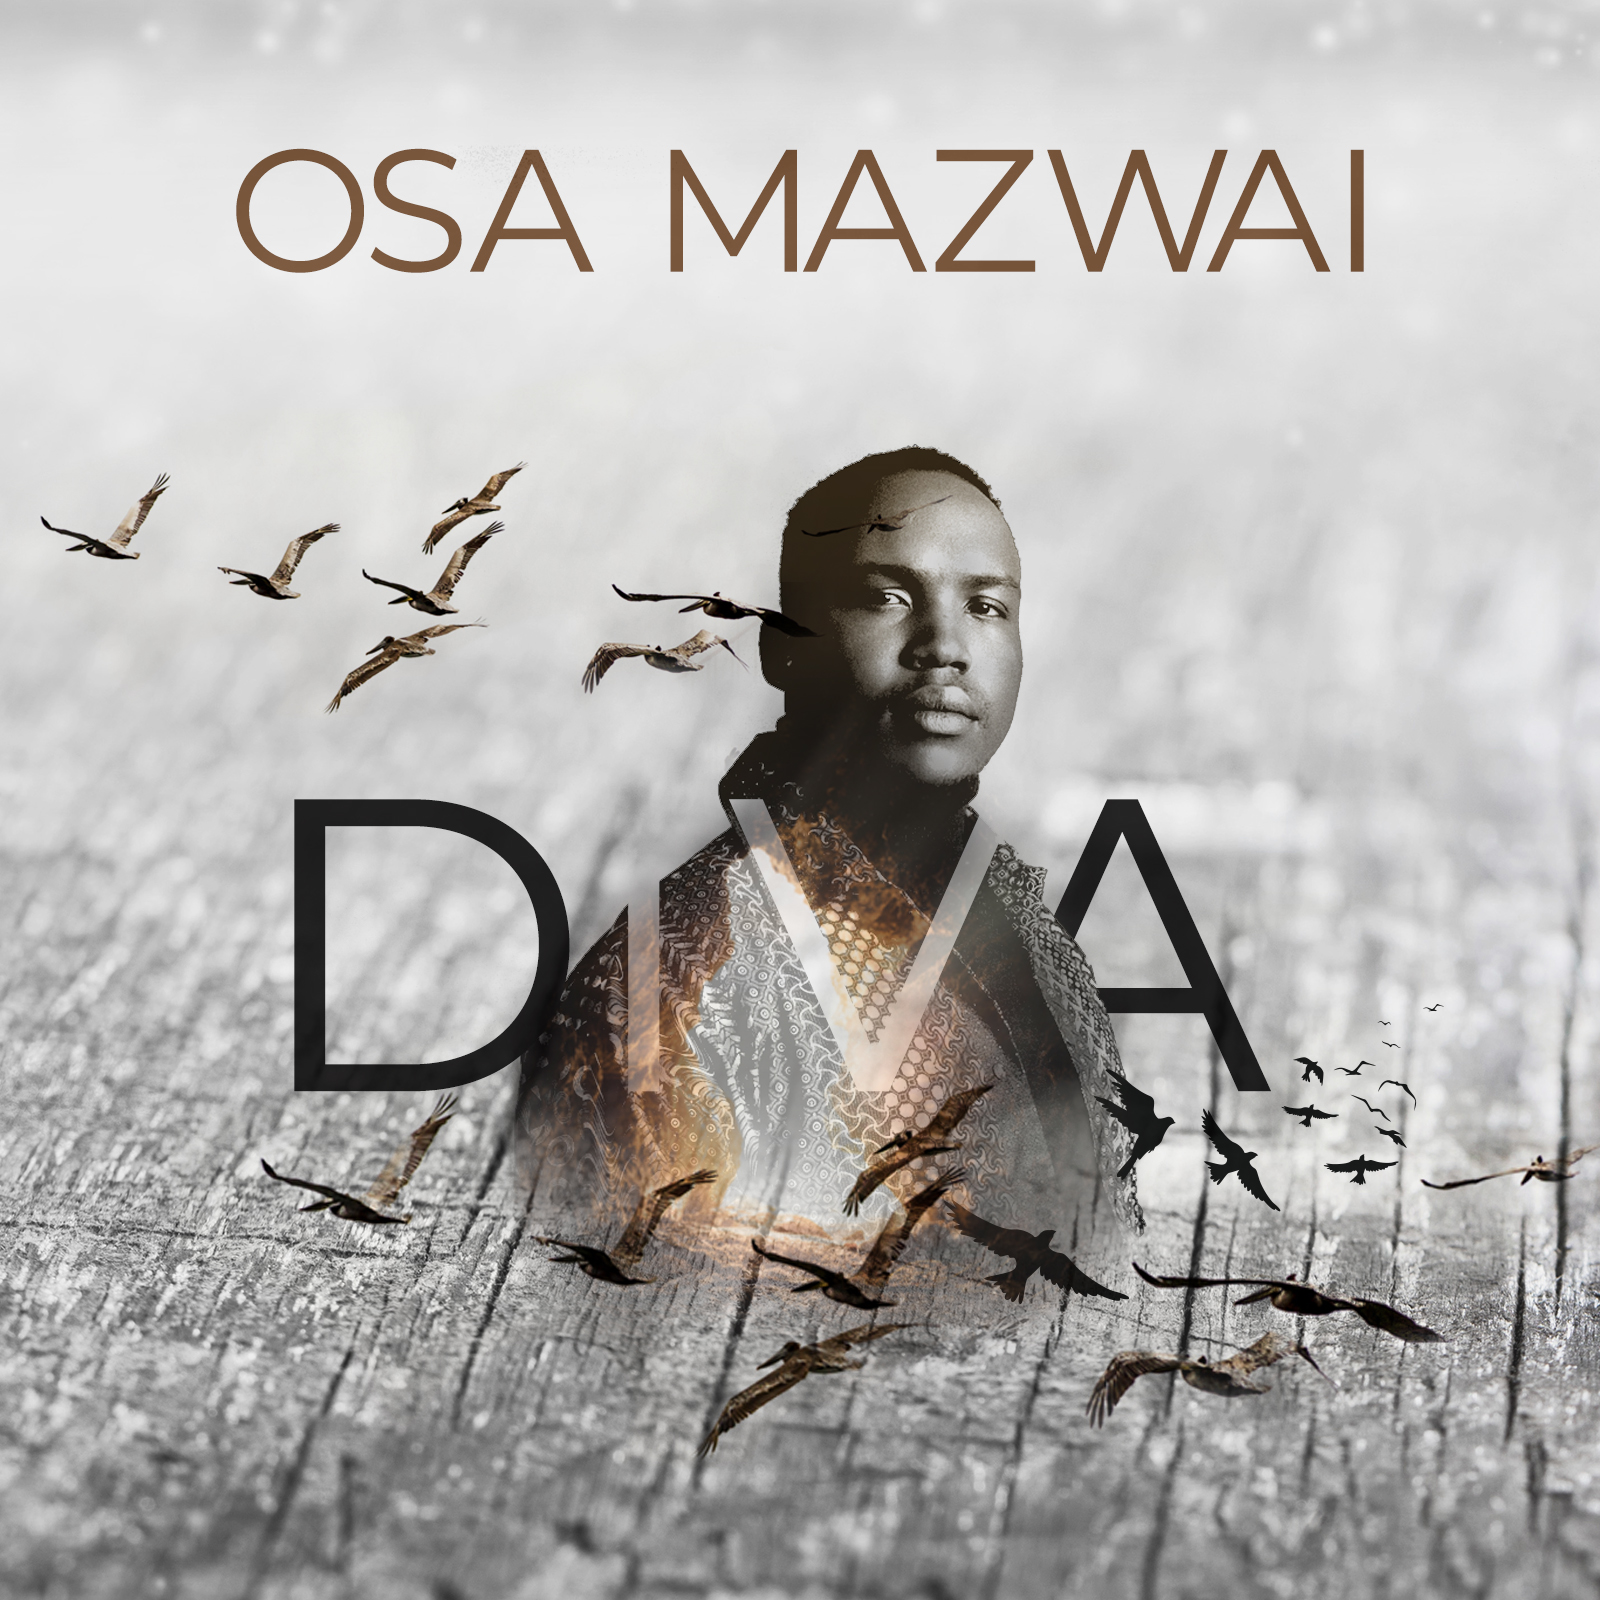 ‘Osa Mazwai’ gives birth to his new and spirited record #DIVA.